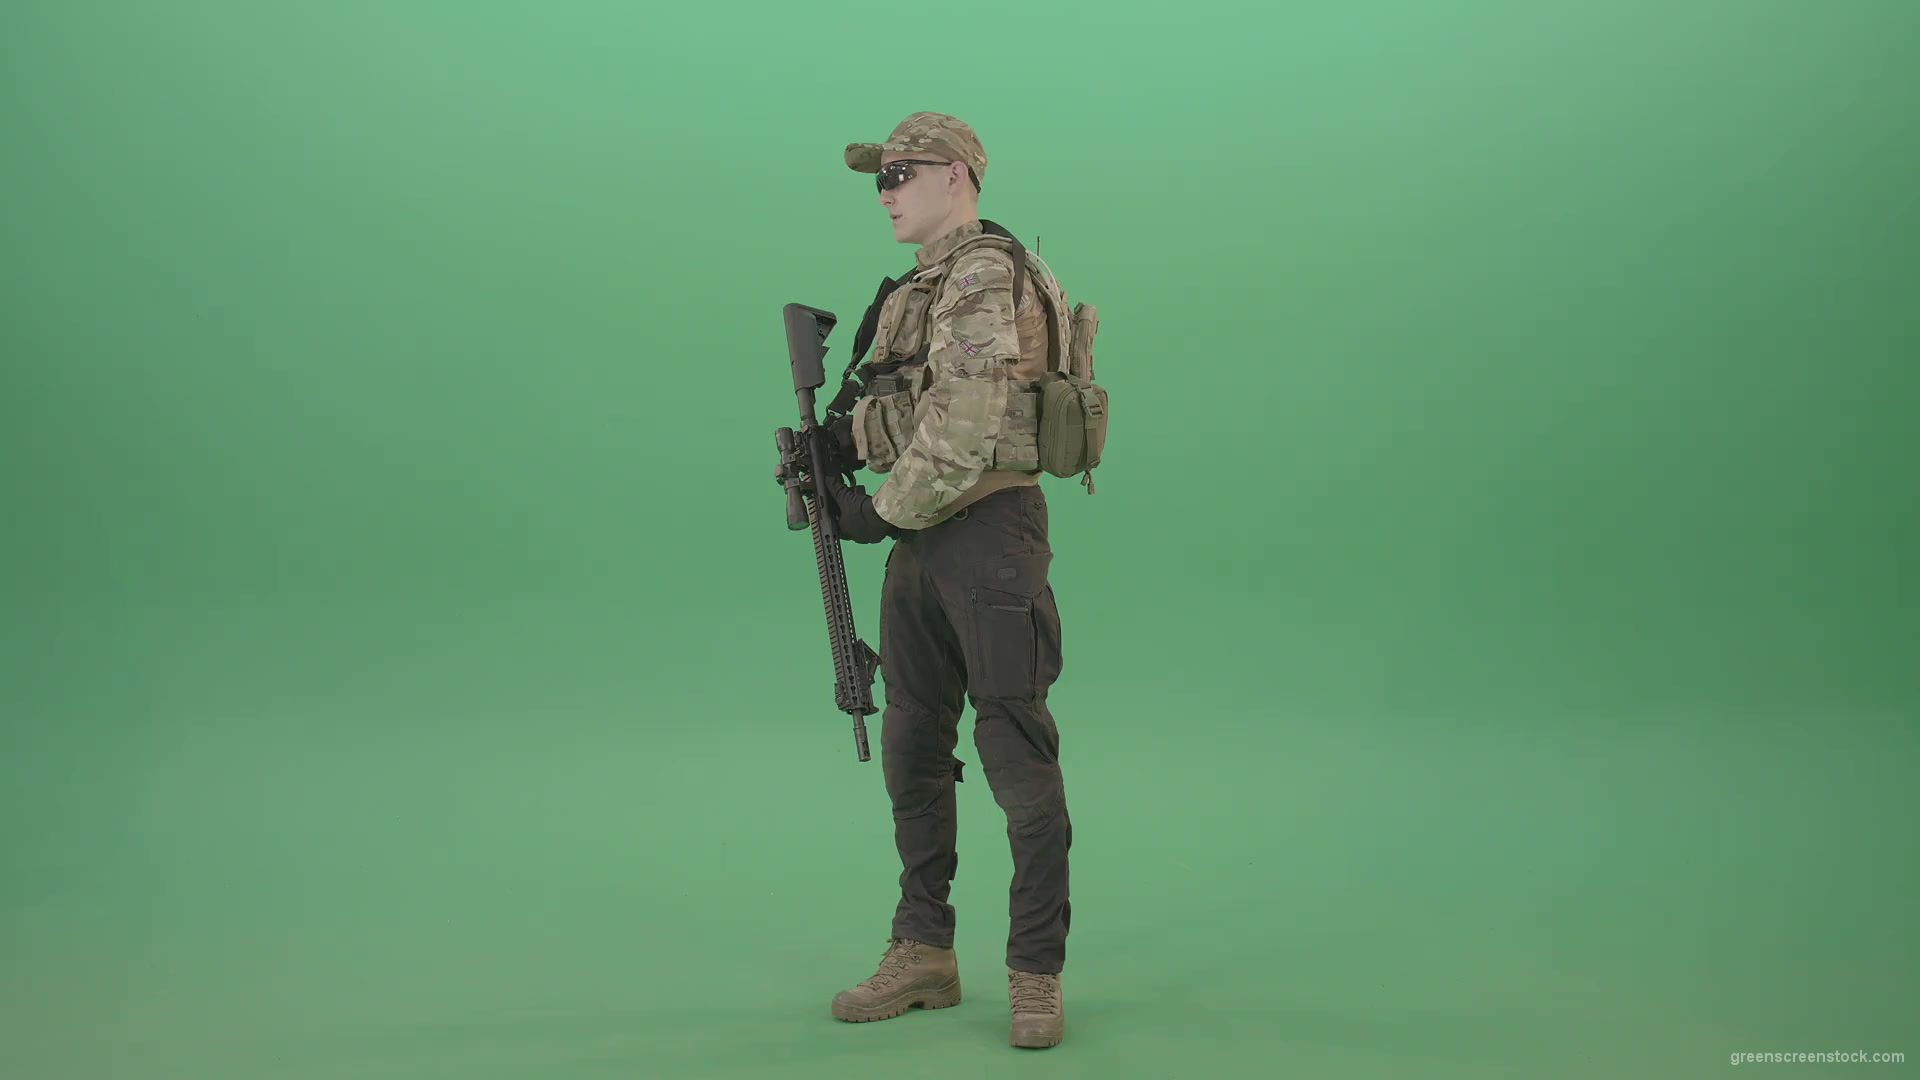 Counter-strike-army-police-man-shooting-enemy-from-machine-gun-in-Camouflage-uniform-on-green-screen-4K-Video-Footage-1920_001 Green Screen Stock